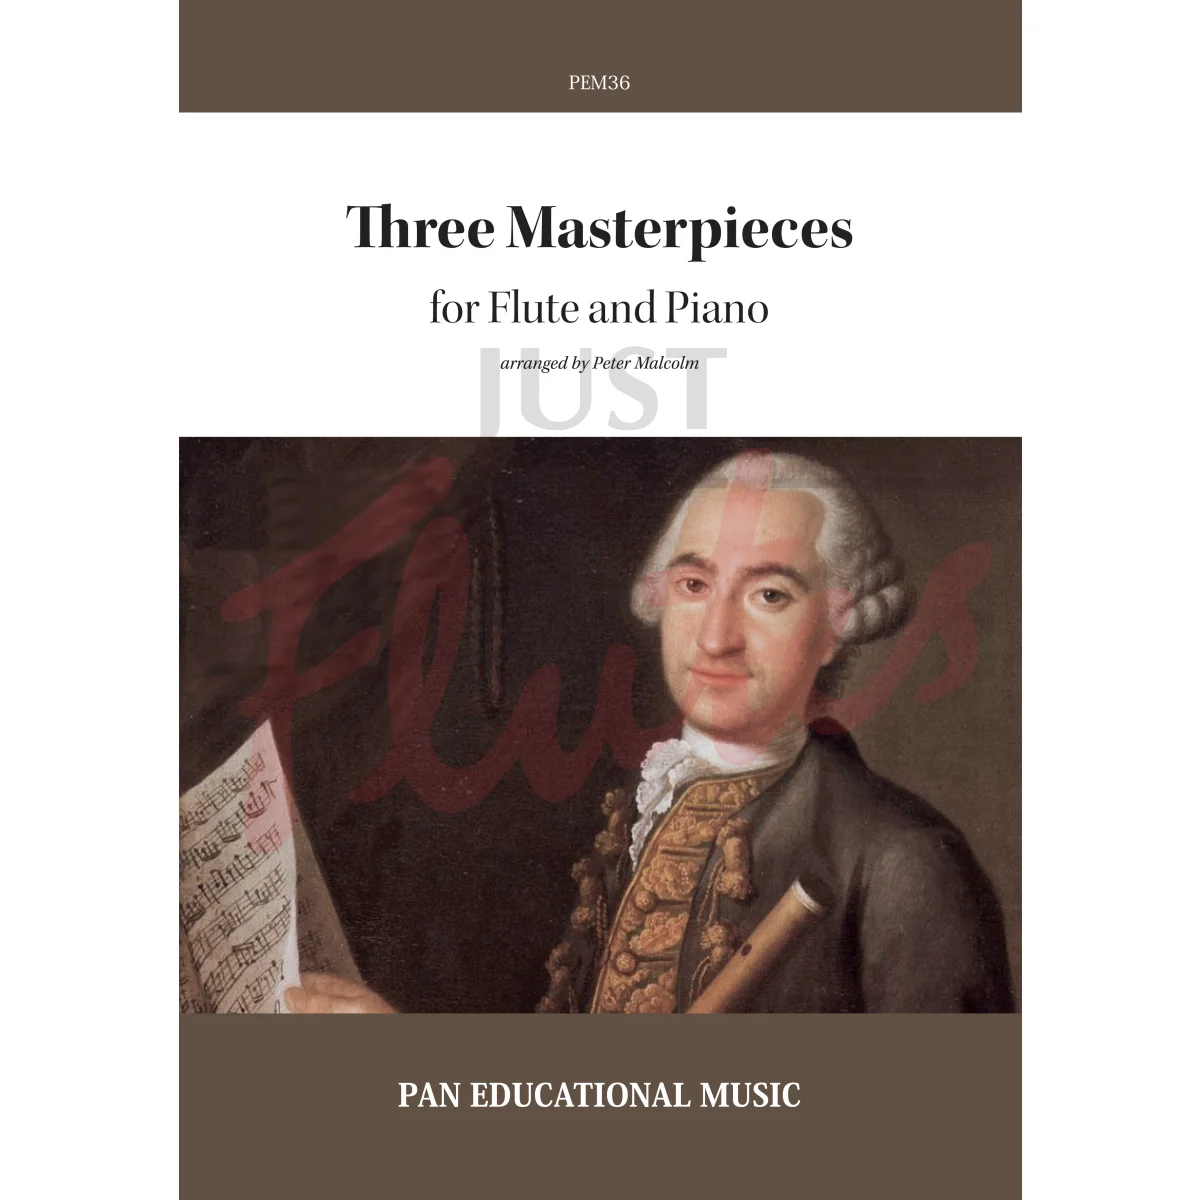 Three Masterpieces for Flute and Piano